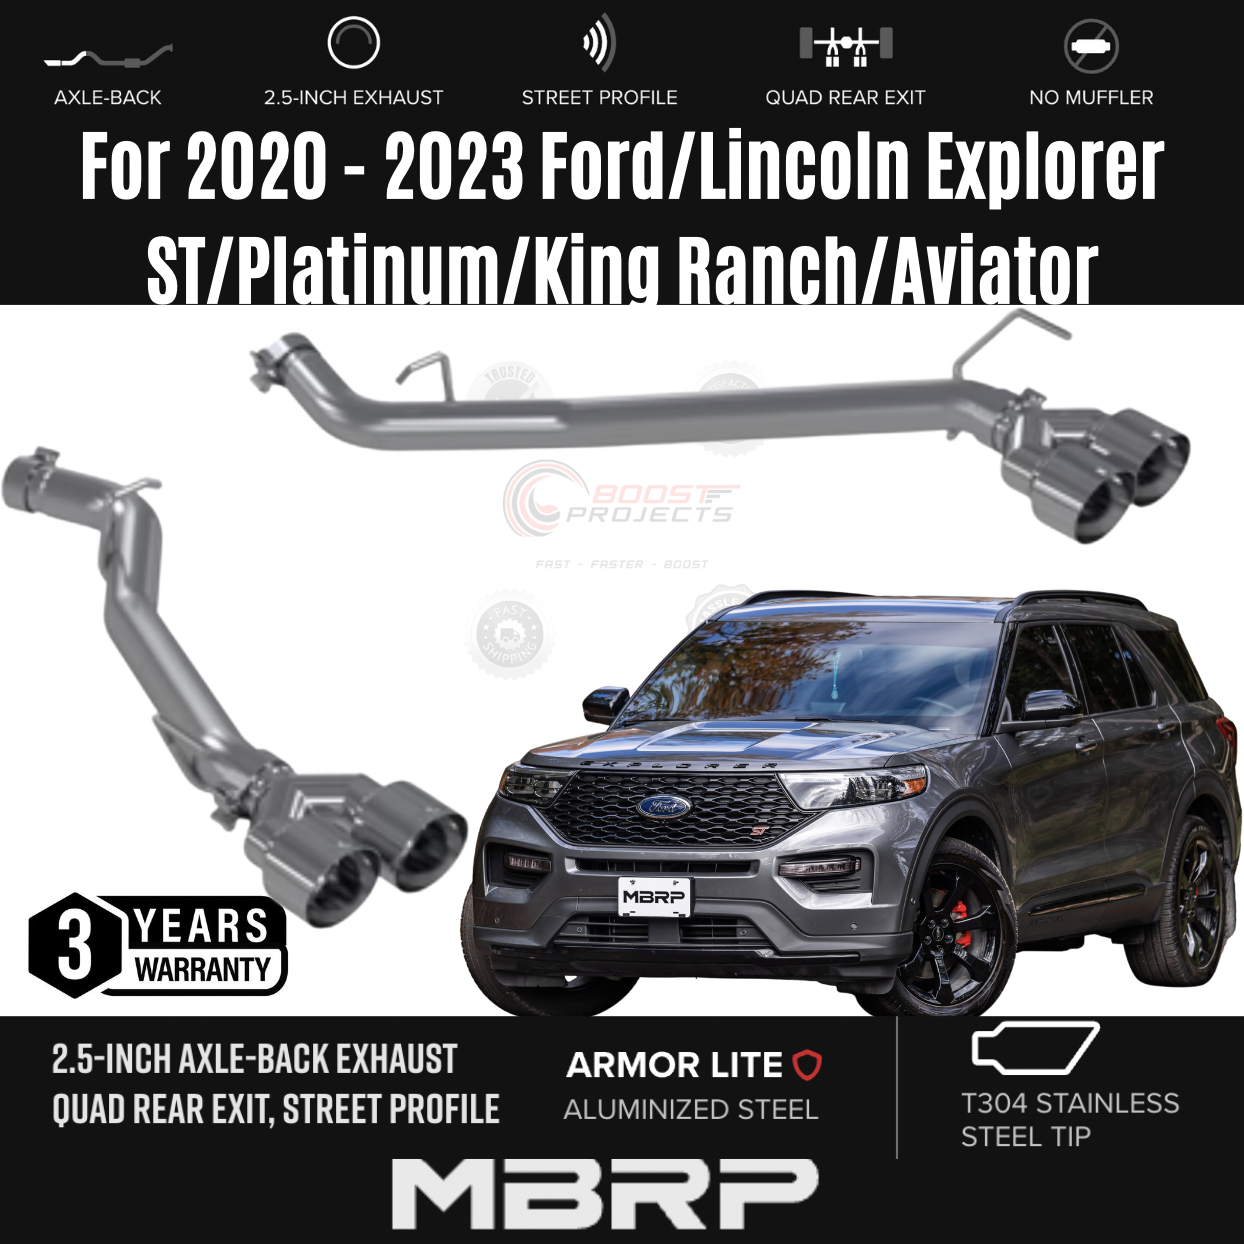 MBRP 2.5'' axle back quad rear exhaust with ss tip for 2017 2018 2019 2020 2021 2022 2023 ford lincol explorer st platinium king ranch st 3.0L eco boost aluminized stainless steel